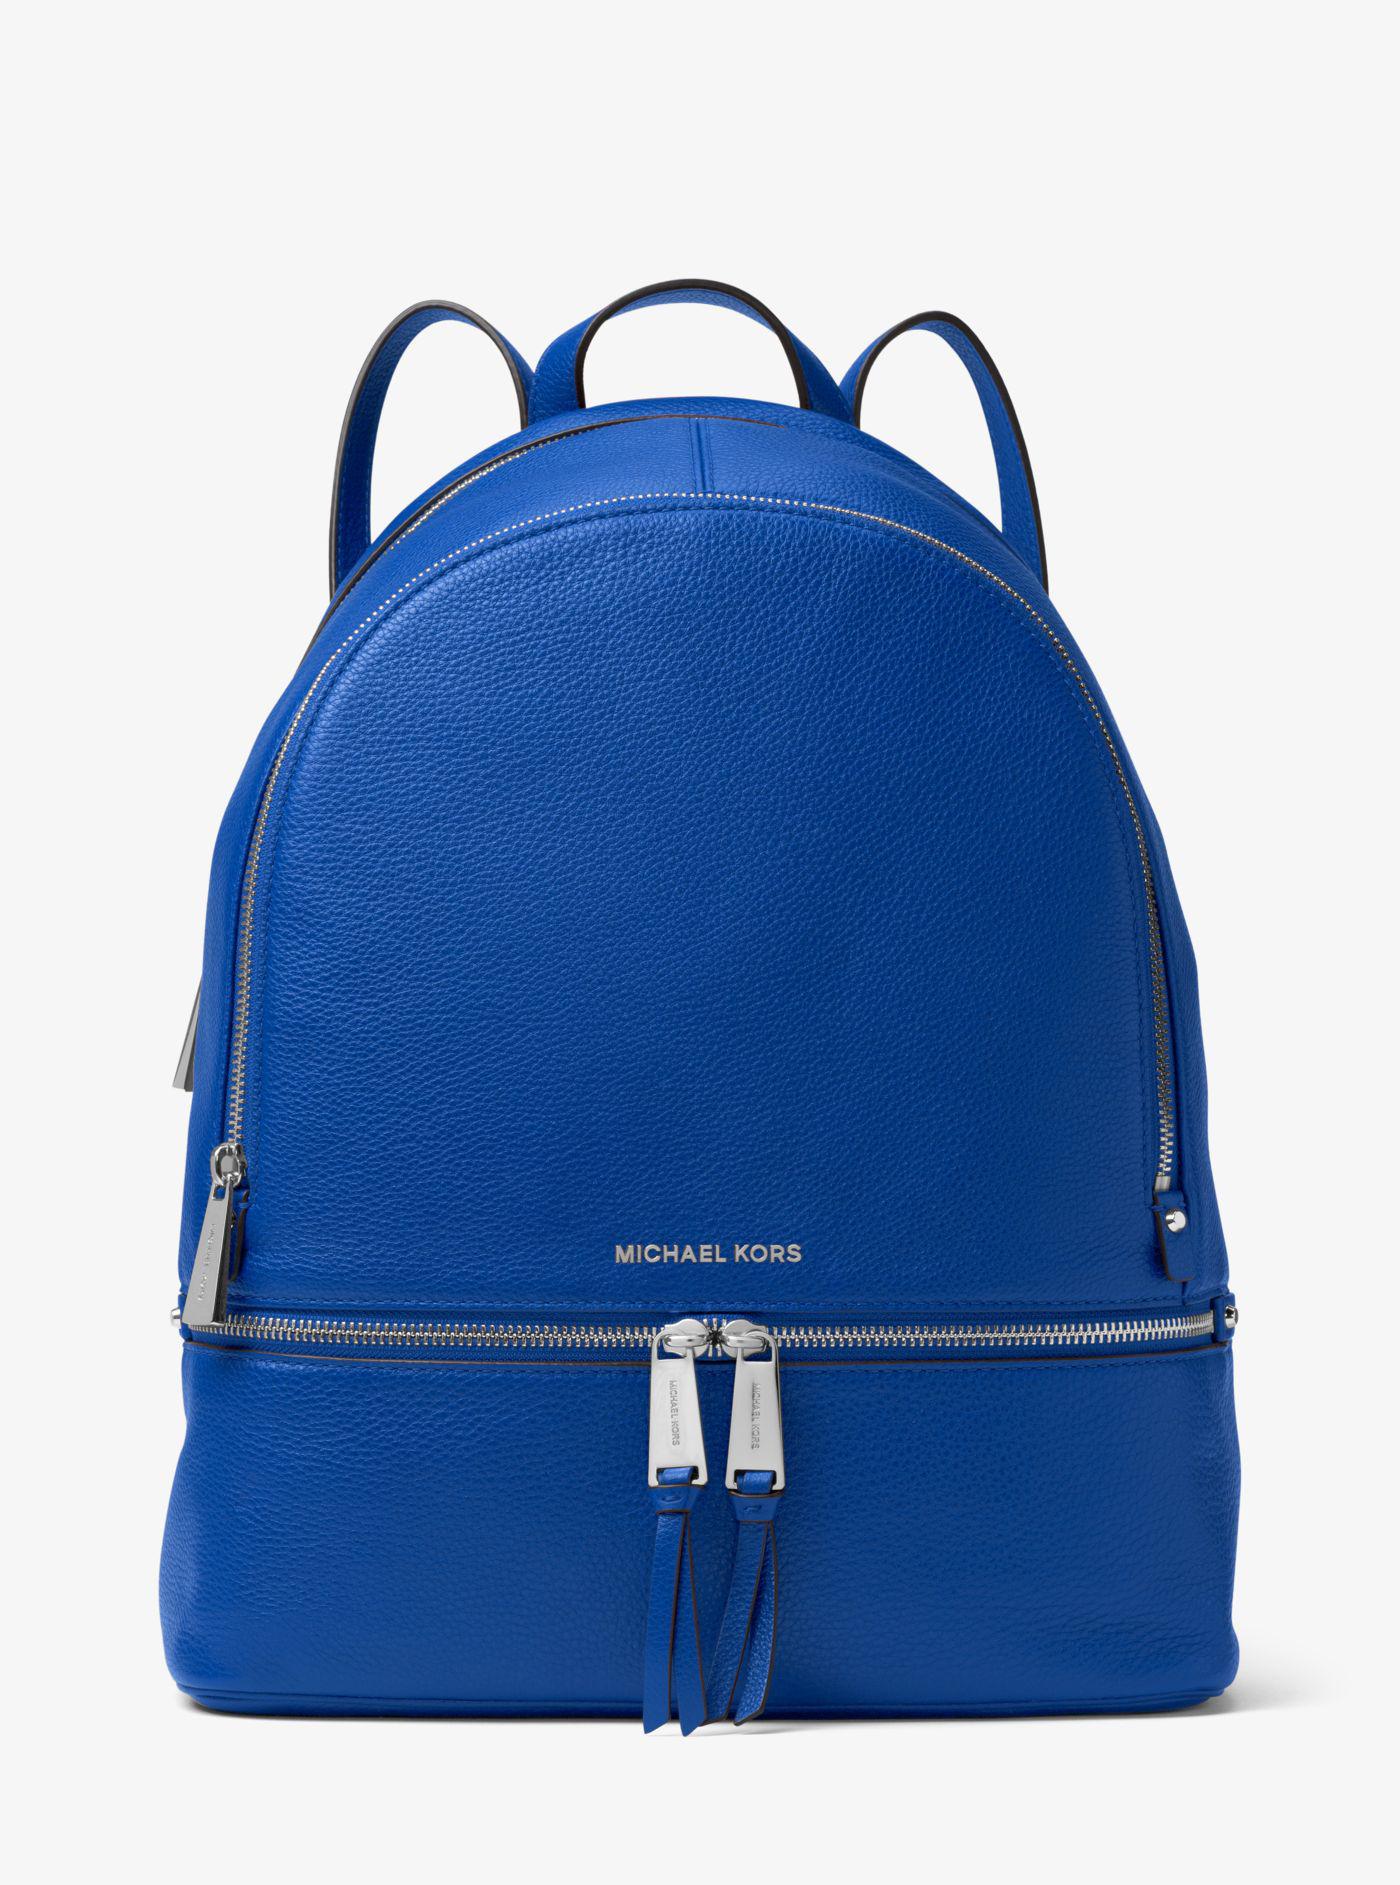 Michael Kors Rhea Large Leather Backpack in Blue | Lyst